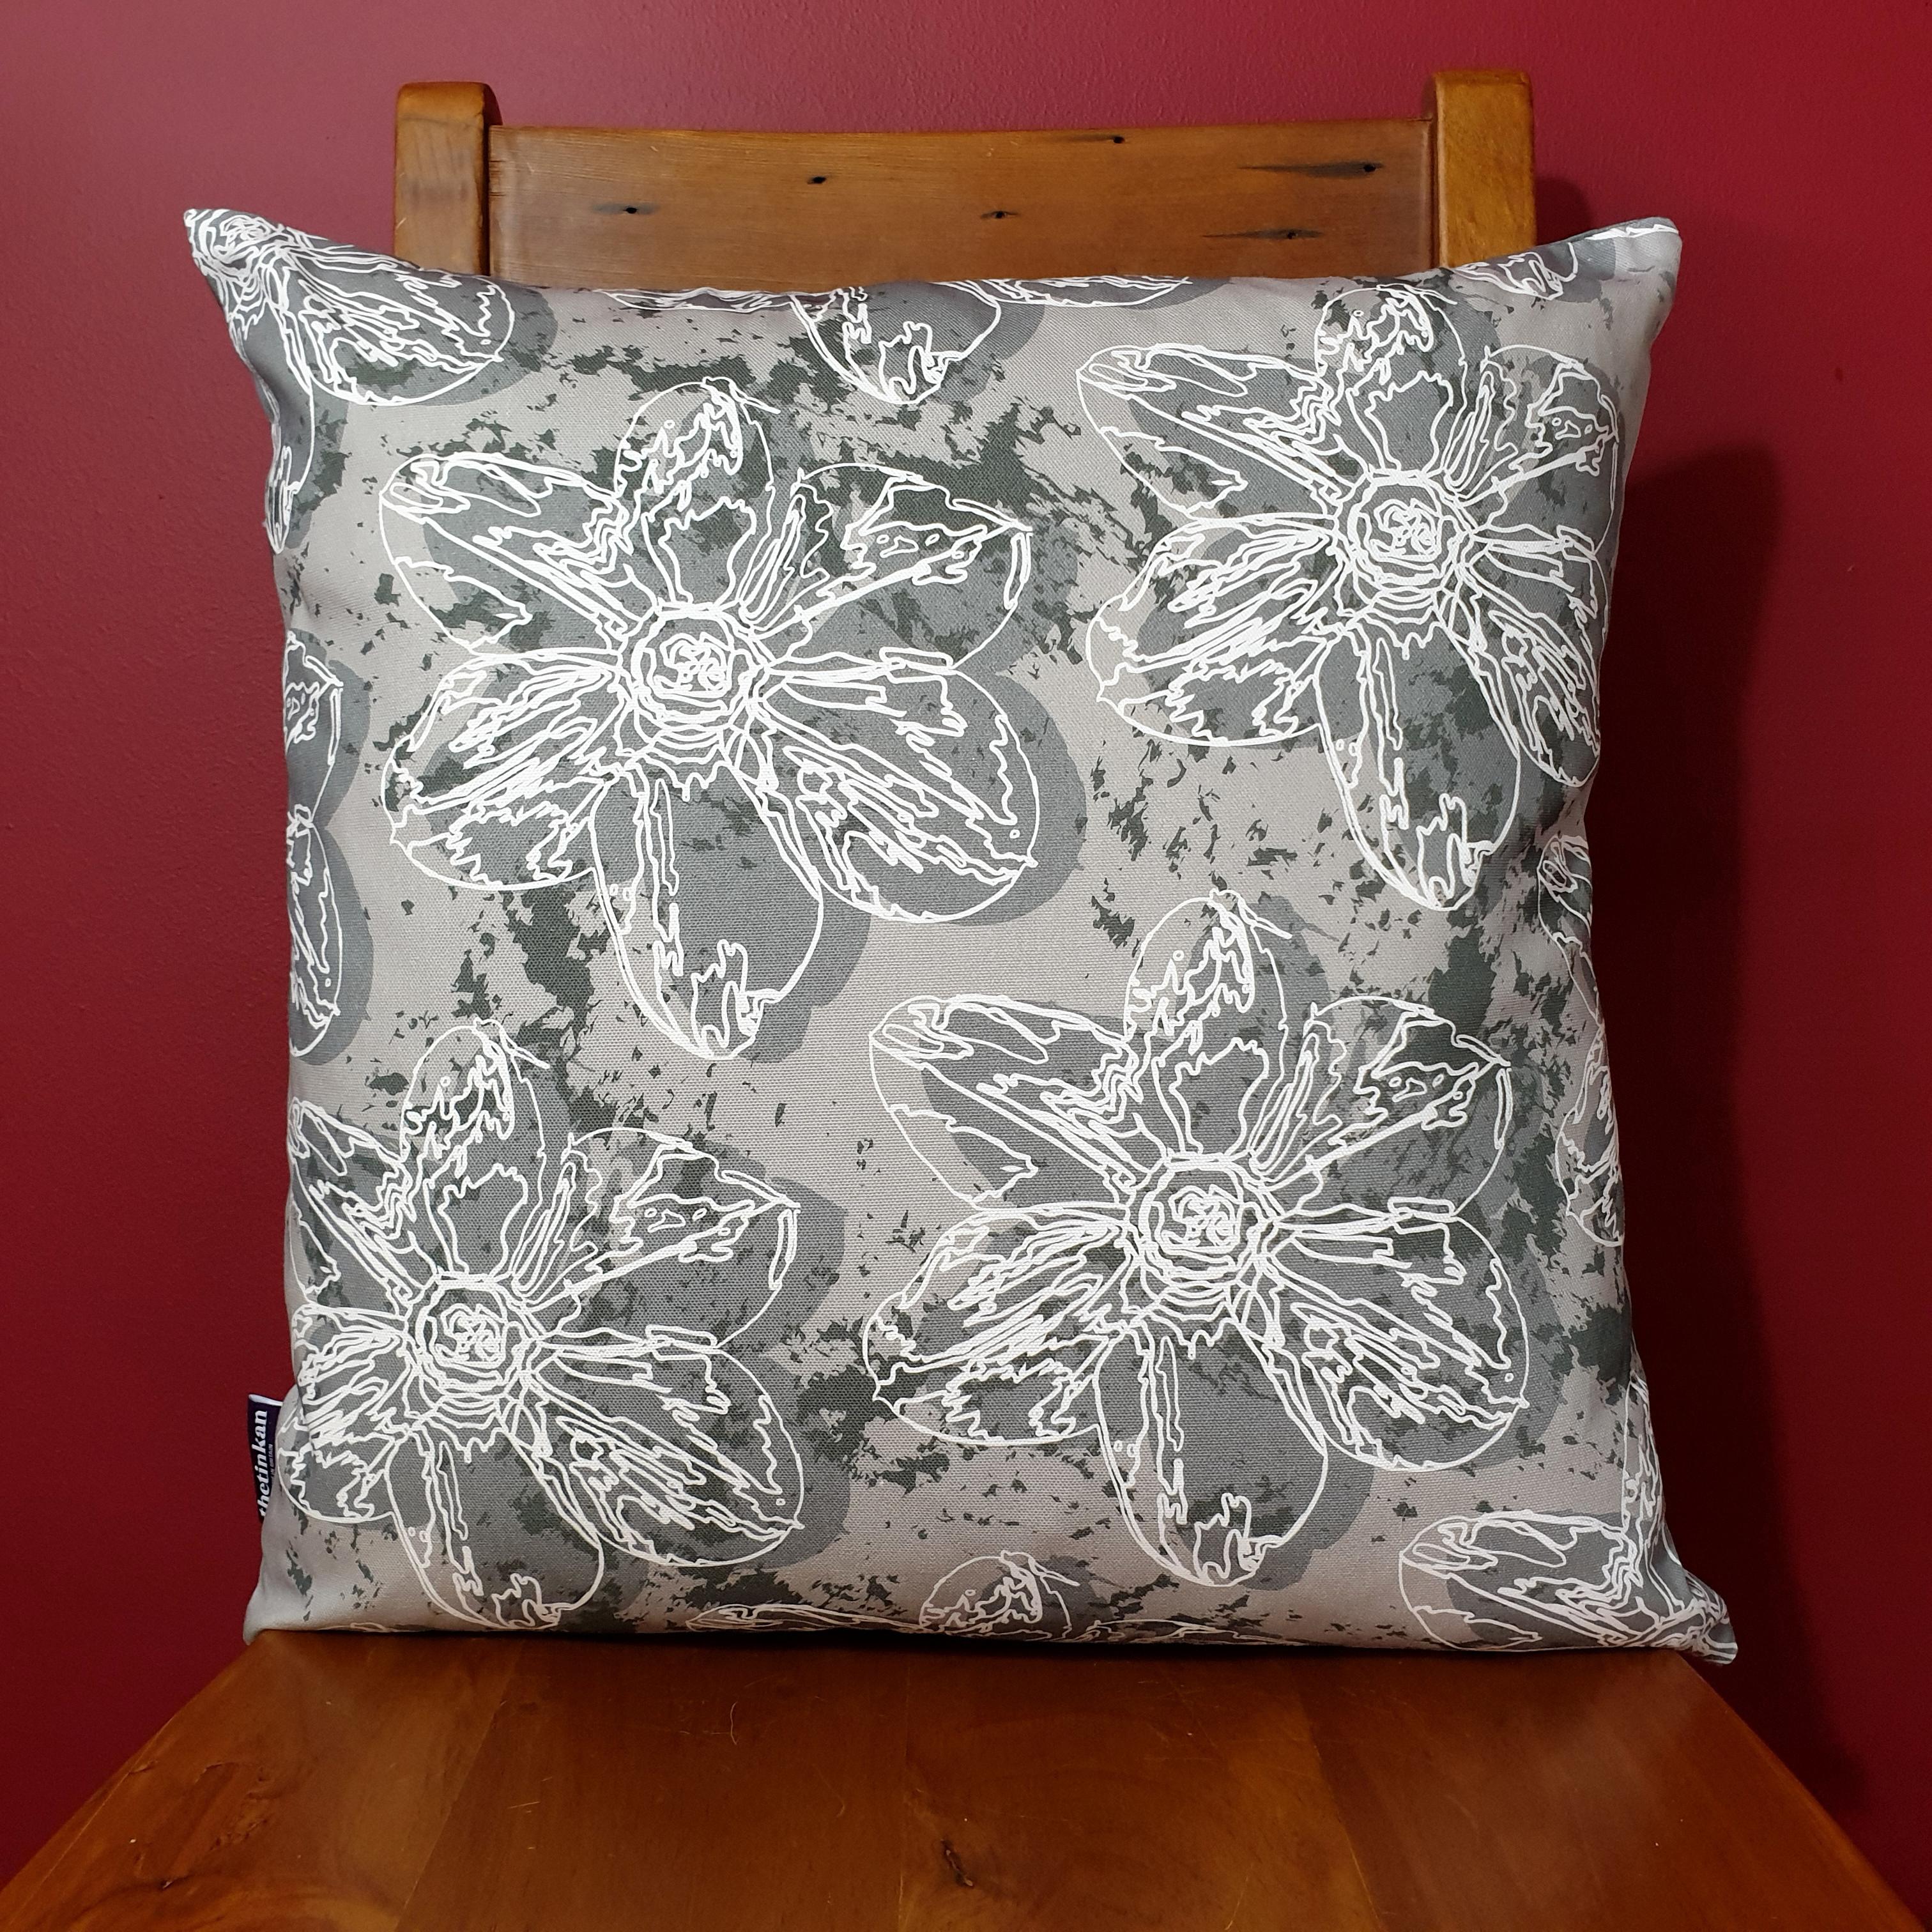 Double-sided 51cm square Flower Splash cushion designed by thetinkan. Dark grey narcissus flower with white traced outline set within a grey background with charcoal grey paint splashes. Available with an optional luxury cushion inner pad. VIEW PRODUCT >>